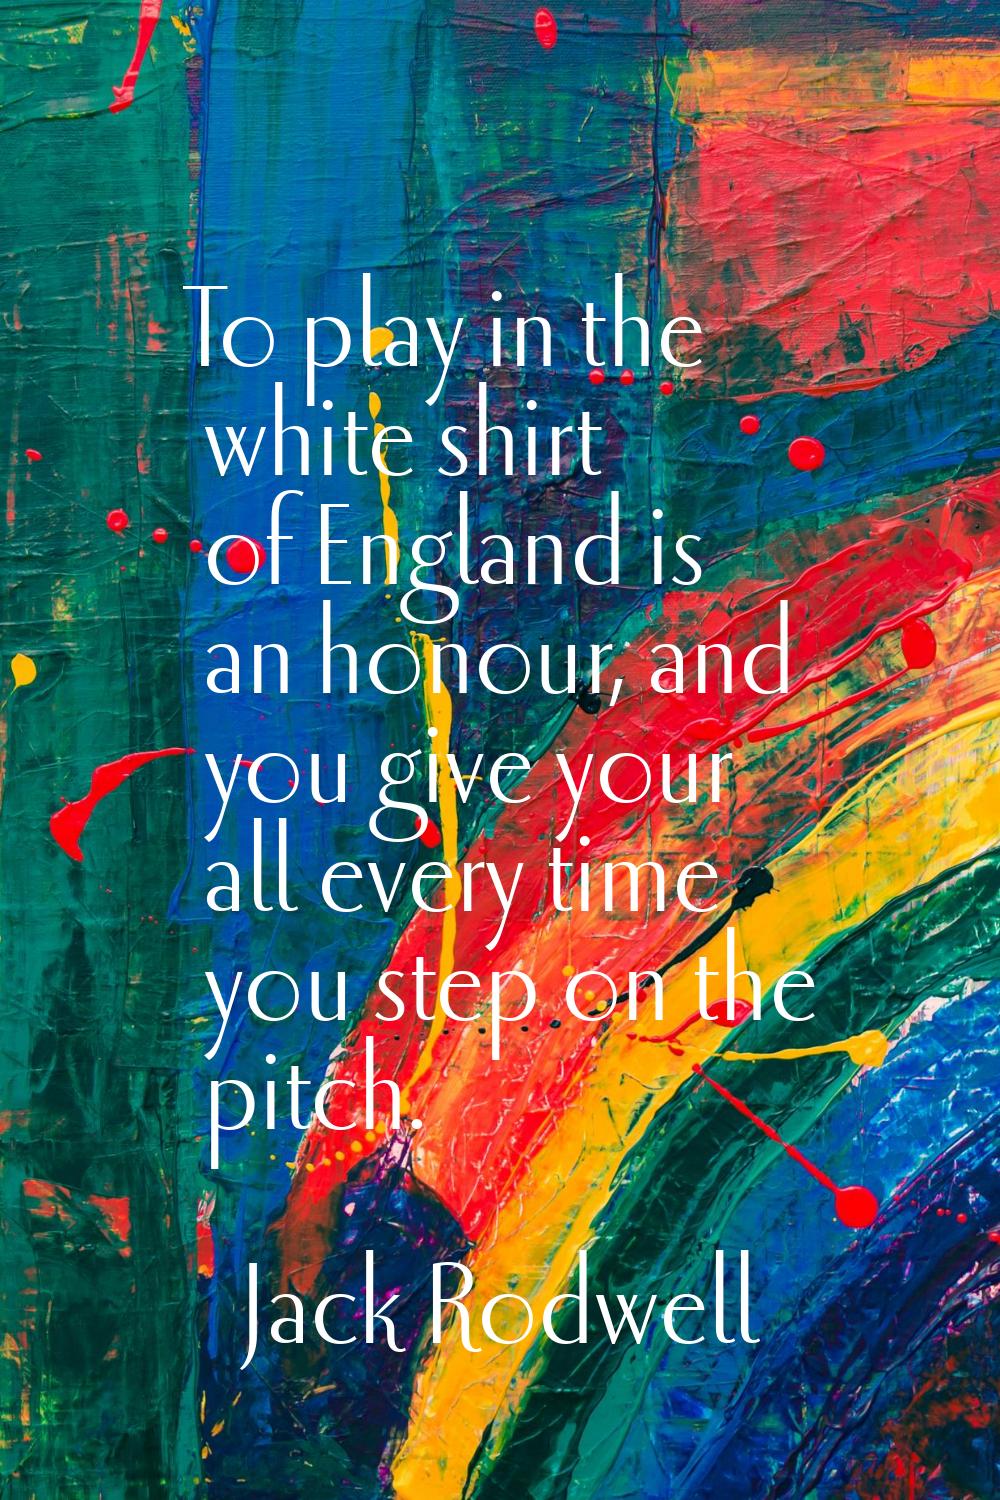 To play in the white shirt of England is an honour, and you give your all every time you step on th